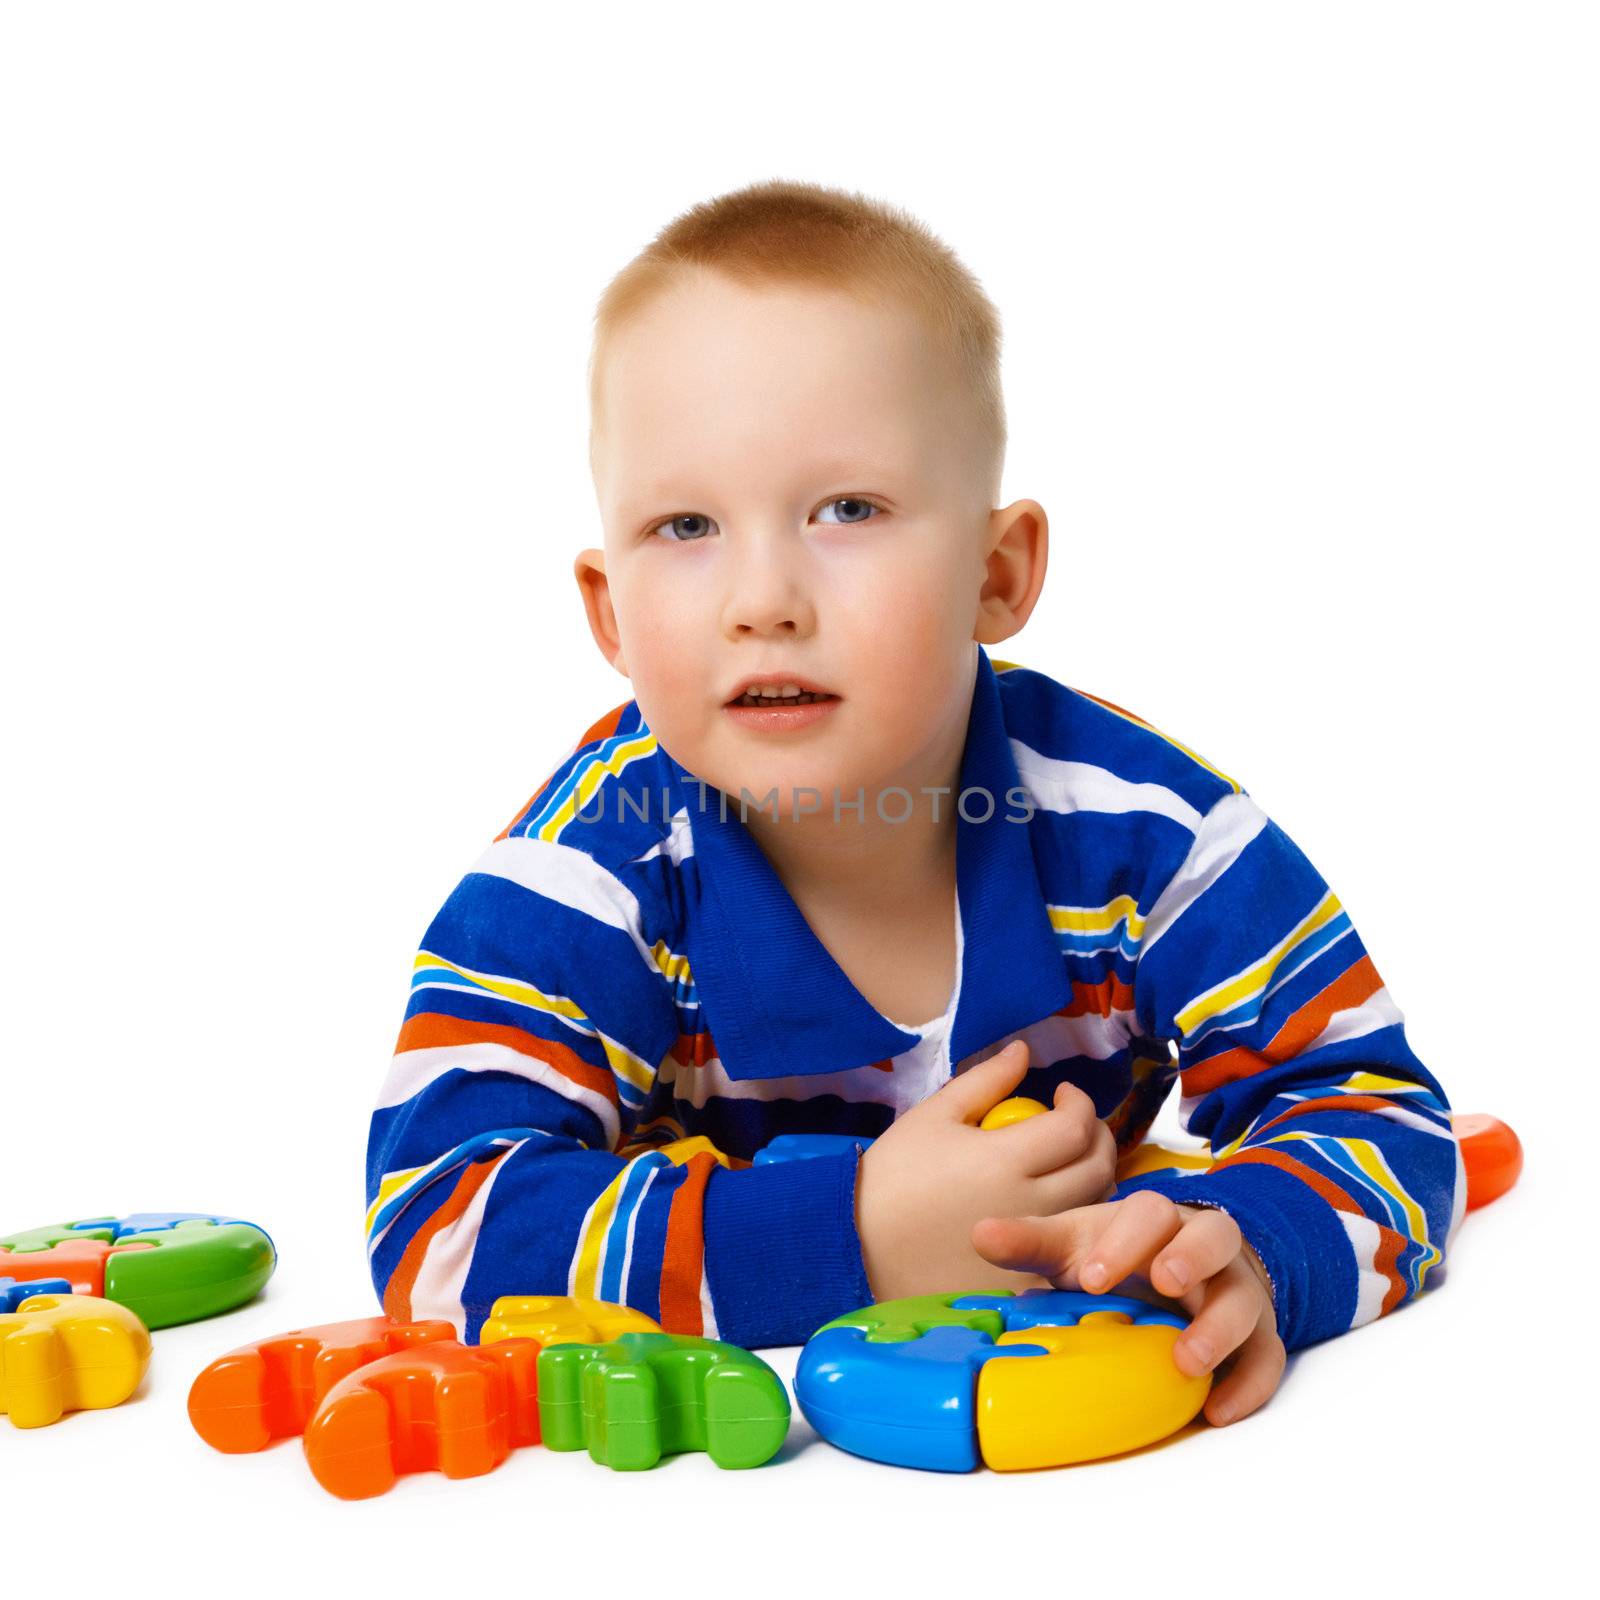 Little boy with color toys on white by pzaxe